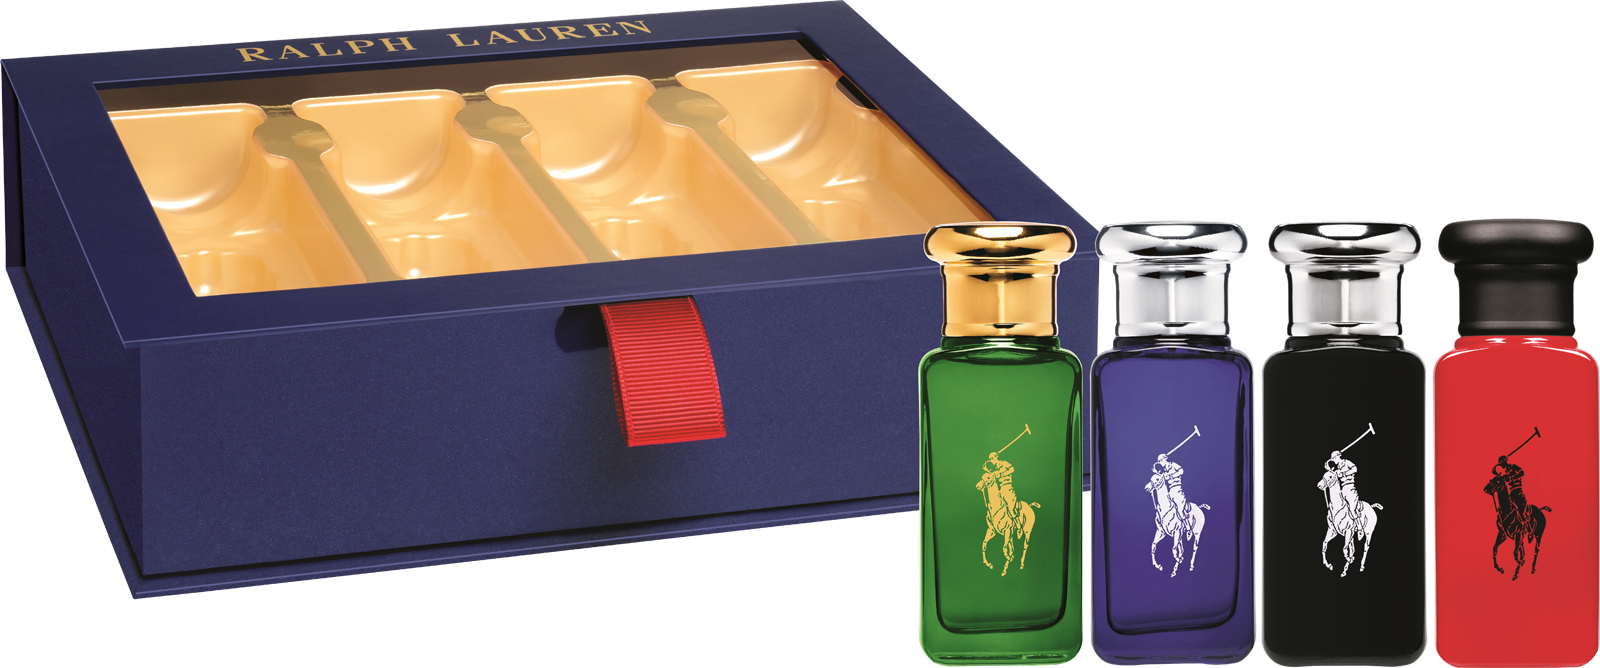 polo mini aftershave set - 58% OFF 